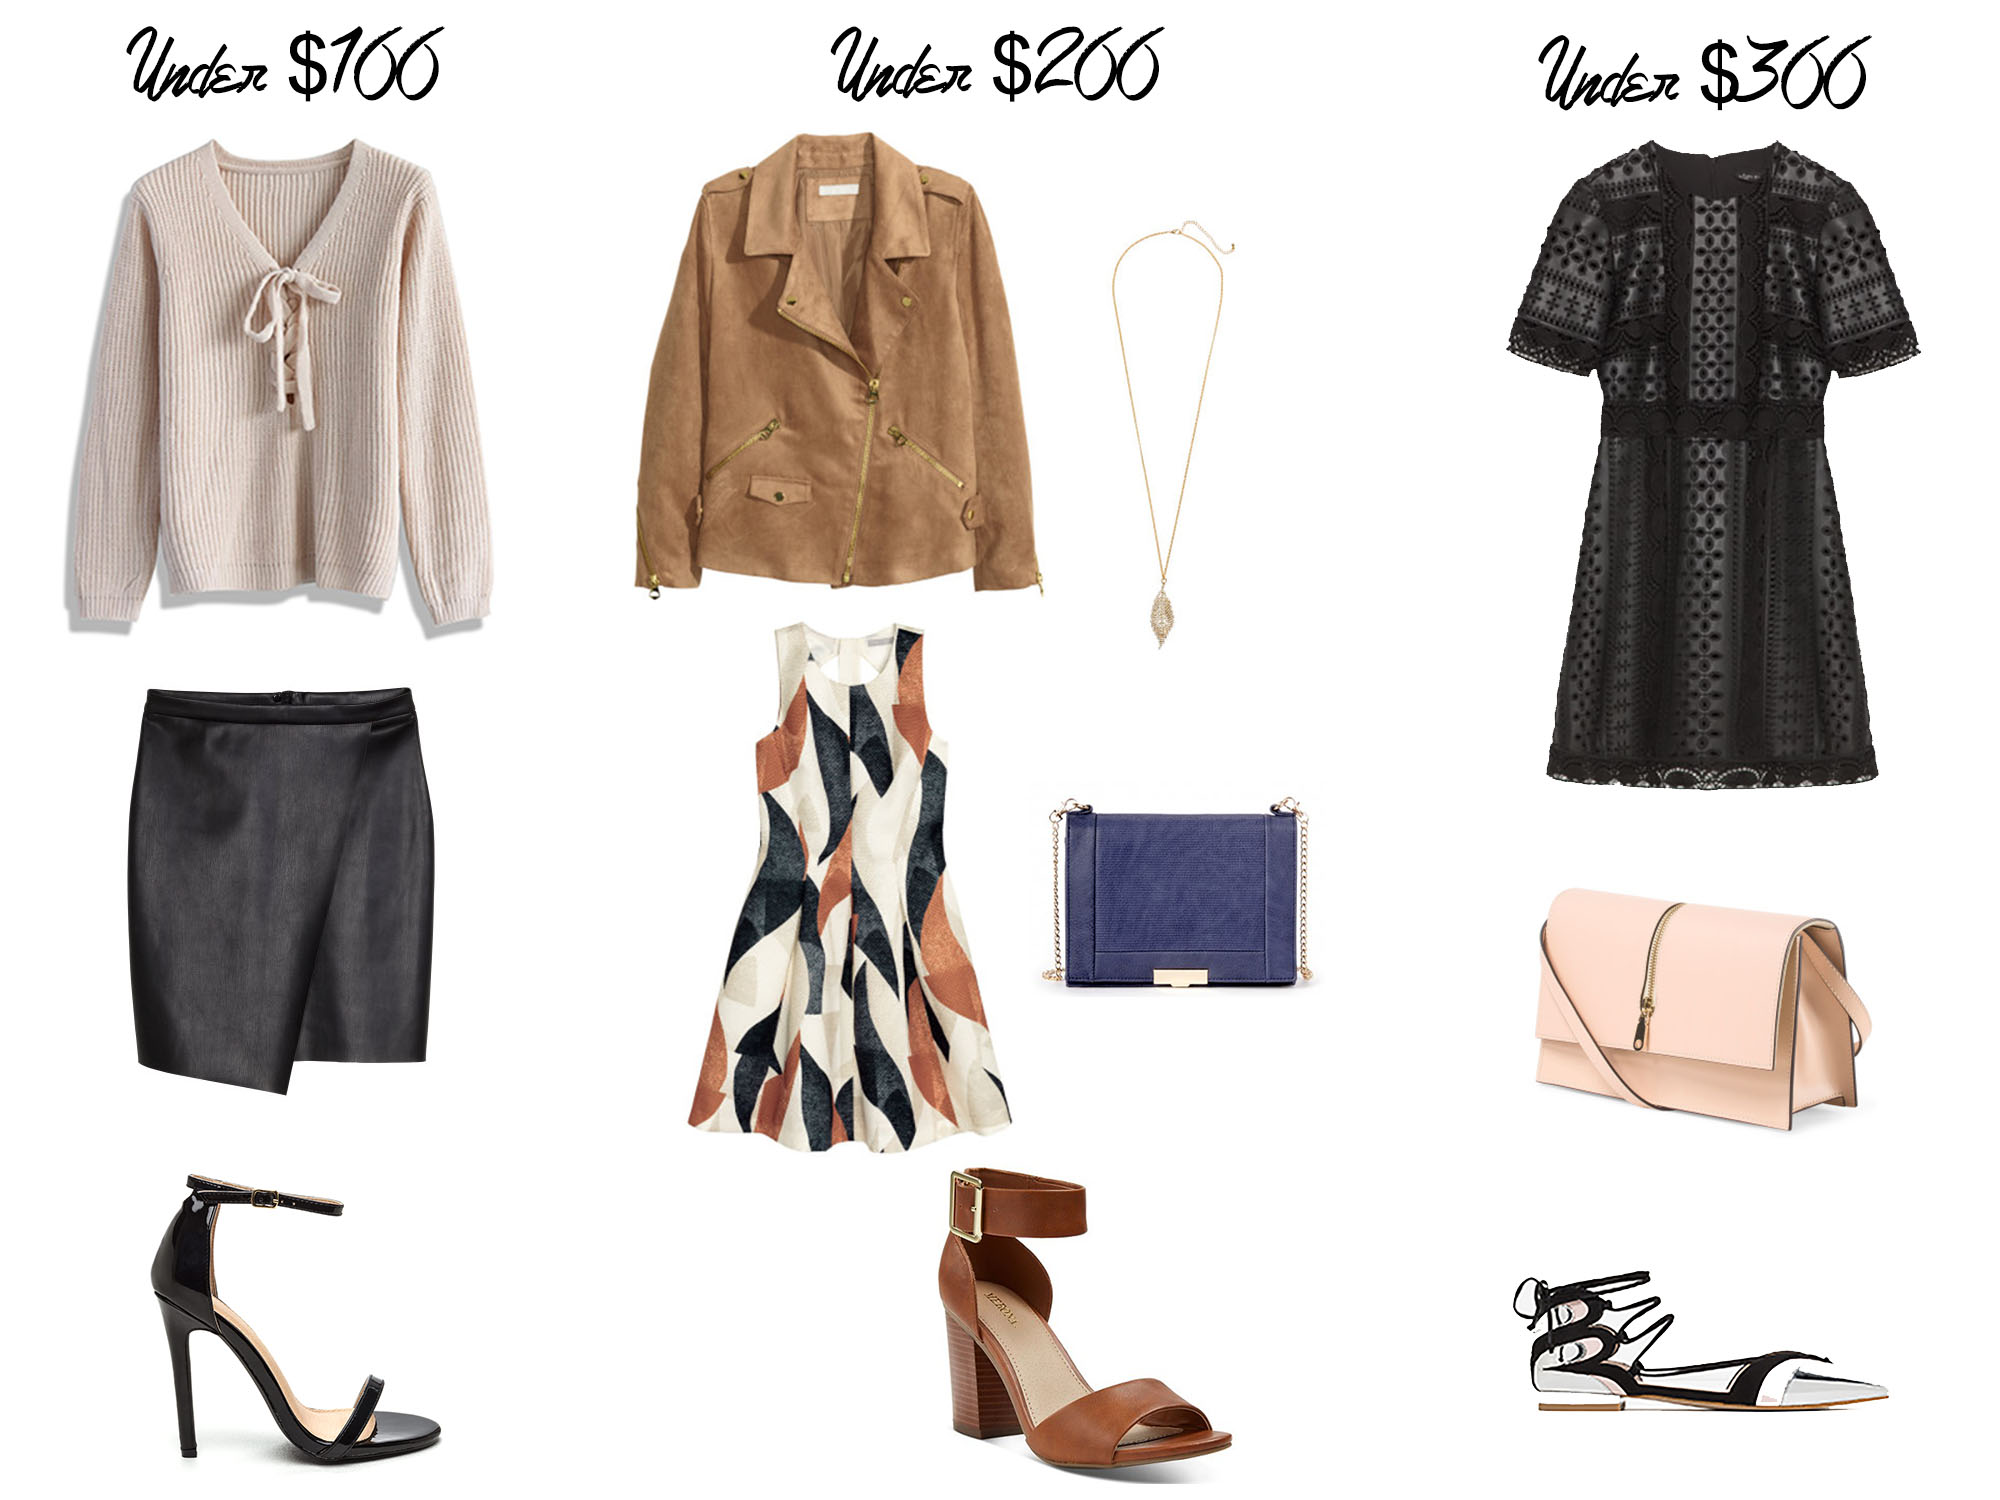 February: Luxe Looks for Every Budget